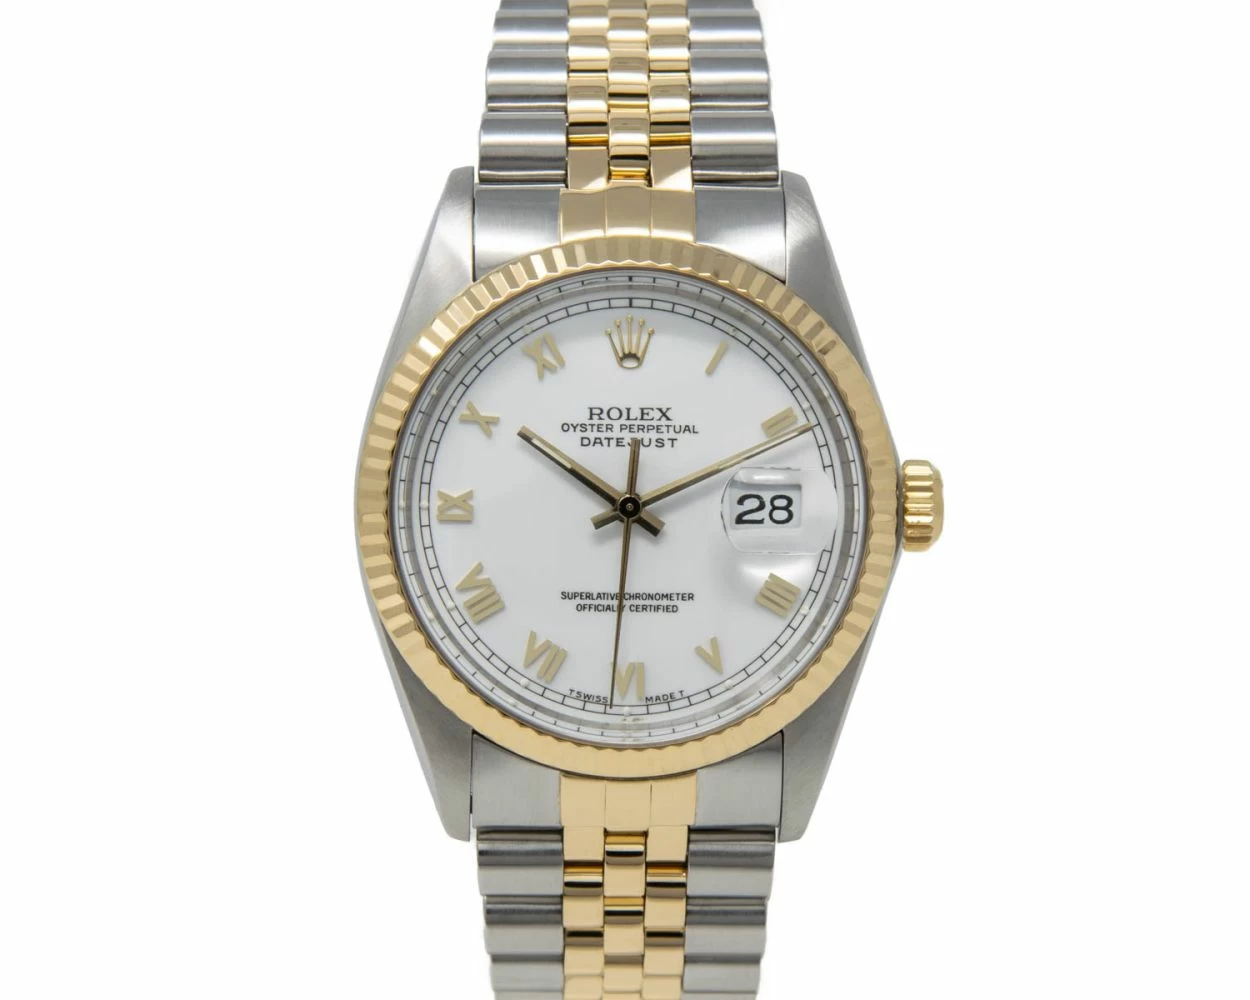 Genuine Rolex Datejust 36mm 16013 Automatic Watch, Steel & Yellow Gold, Silver Dial, 2-Year Warranty, Pre-owned